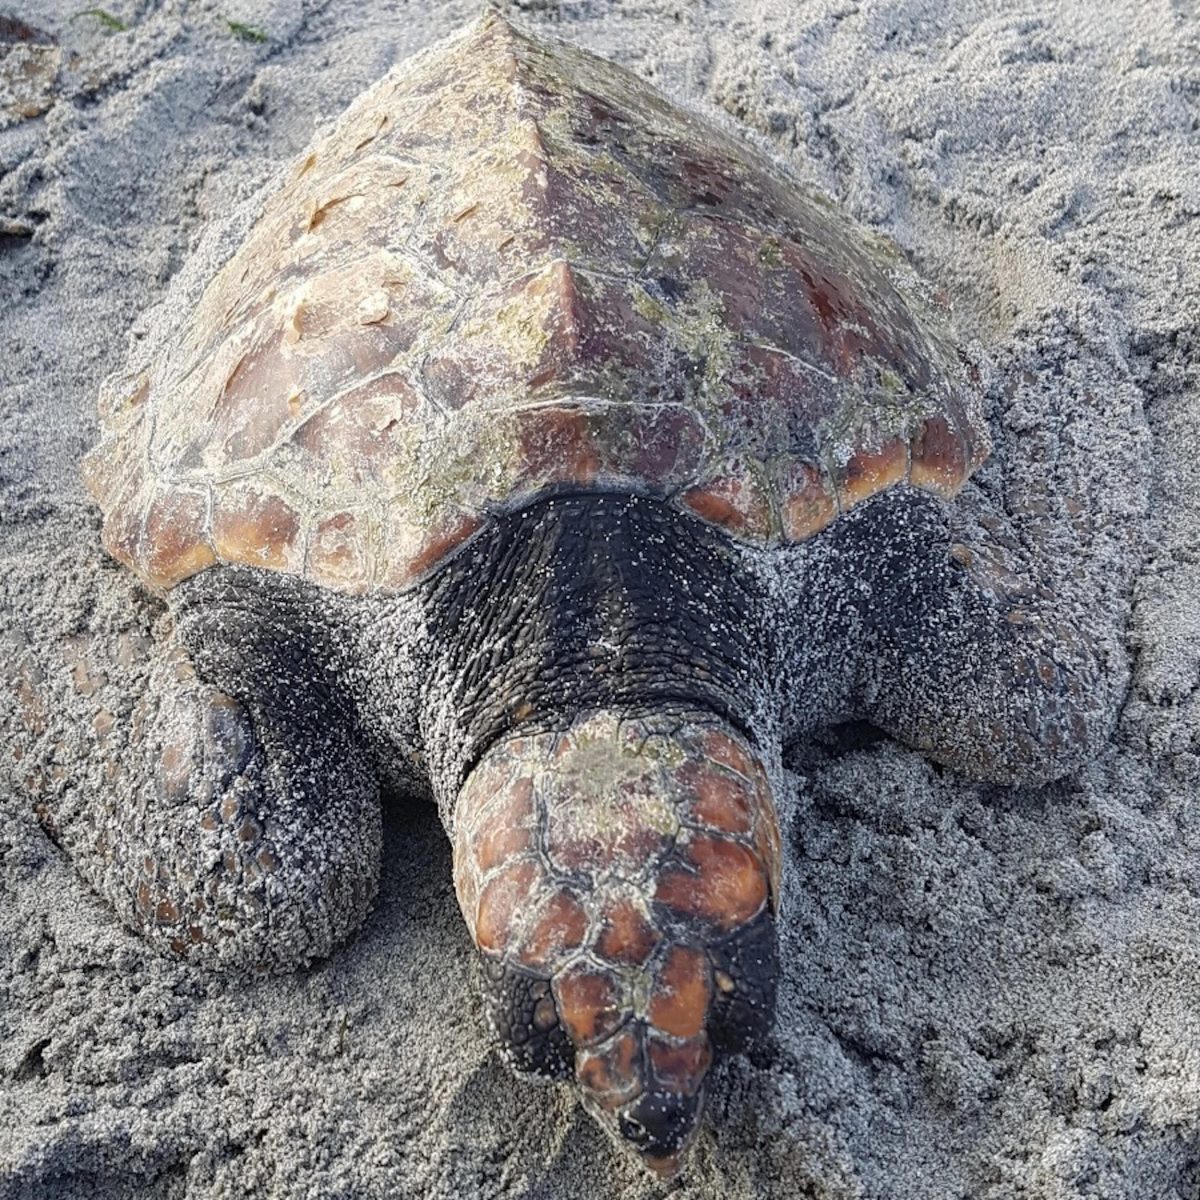 The turtle that washed up on Iona